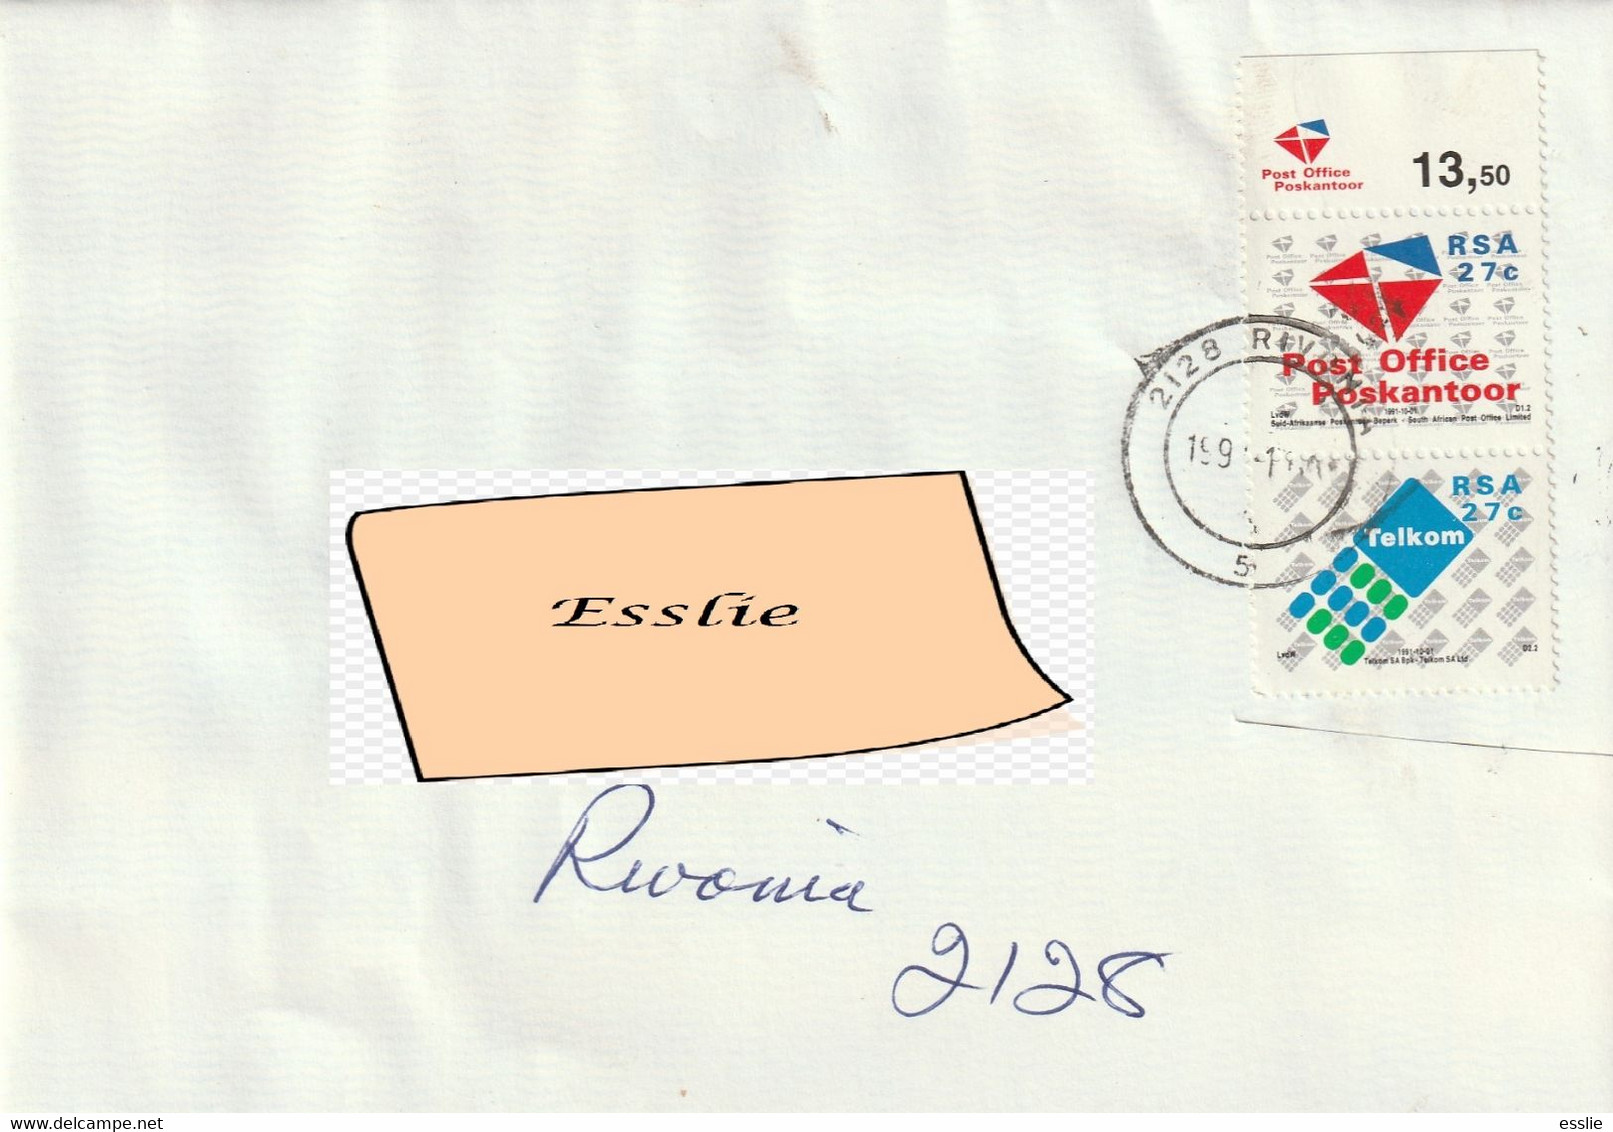 South Africa RSA - 1991 - Creation Of Post Office And Telkom Limited Cover - Briefe U. Dokumente